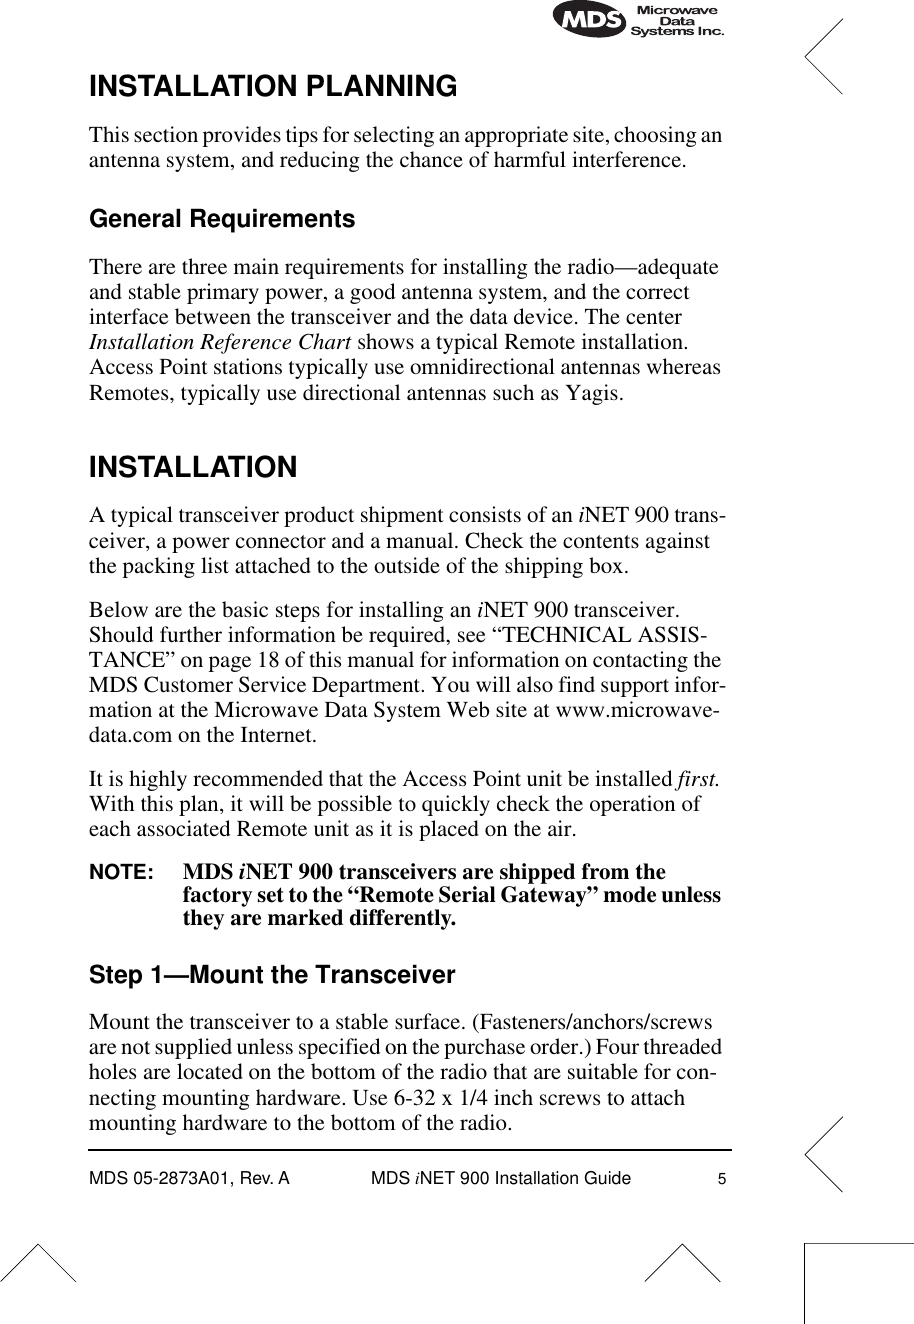  MDS 05-2873A01, Rev. A MDS  i NET 900 Installation Guide 5 INSTALLATION PLANNING This section provides tips for selecting an appropriate site, choosing an antenna system, and reducing the chance of harmful interference. General Requirements There are three main requirements for installing the radio—adequate and stable primary power, a good antenna system, and the correct interface between the transceiver and the data device. The center  Installation Reference Chart  shows a typical Remote installation. Access Point stations typically use omnidirectional antennas whereas Remotes, typically use directional antennas such as Yagis. INSTALLATION A typical transceiver product shipment consists of an  i NET 900 trans-ceiver, a power connector and a manual. Check the contents against the packing list attached to the outside of the shipping box. Below are the basic steps for installing an  i NET 900 transceiver. Should further information be required, see “TECHNICAL ASSIS-TANCE” on page 18 of this manual for information on contacting the MDS Customer Service Department. You will also find support infor-mation at the Microwave Data System Web site at www.microwave-data.com on the Internet.It is highly recommended that the Access Point unit be installed  first.  With this plan, it will be possible to quickly check the operation of each associated Remote unit as it is placed on the air. NOTE: MDS  i NET 900 transceivers are shipped from the factory set to the “Remote Serial Gateway” mode unless they are marked differently. Step 1—Mount the Transceiver Mount the transceiver to a stable surface. (Fasteners/anchors/screws are not supplied unless specified on the purchase order.) Four threaded holes are located on the bottom of the radio that are suitable for con-necting mounting hardware. Use 6-32 x 1/4 inch screws to attach mounting hardware to the bottom of the radio.